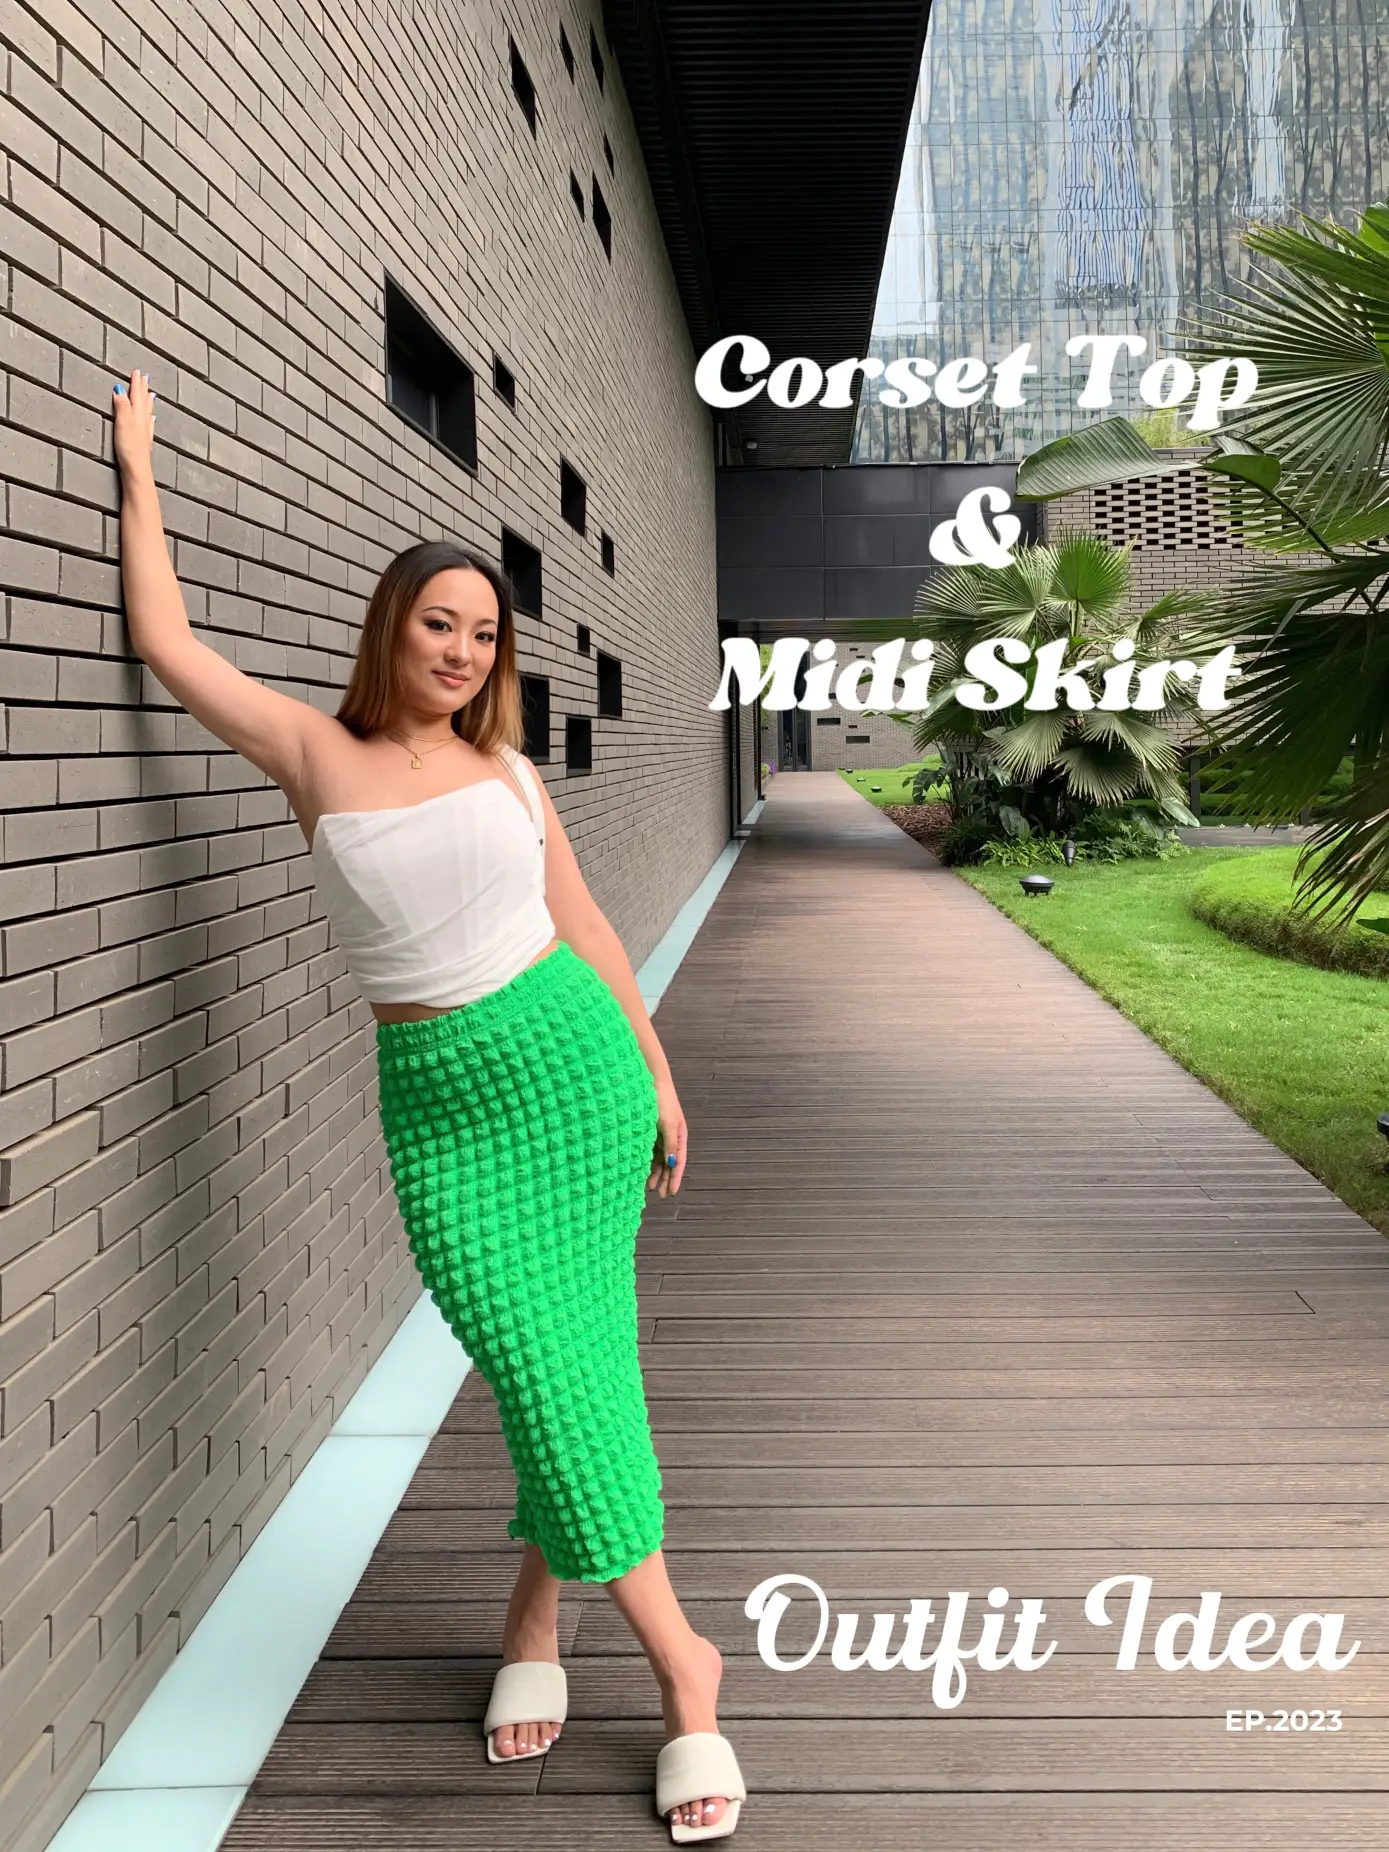 Corset Top & Midi Skirt for the summer, Gallery posted by Cara Jiang